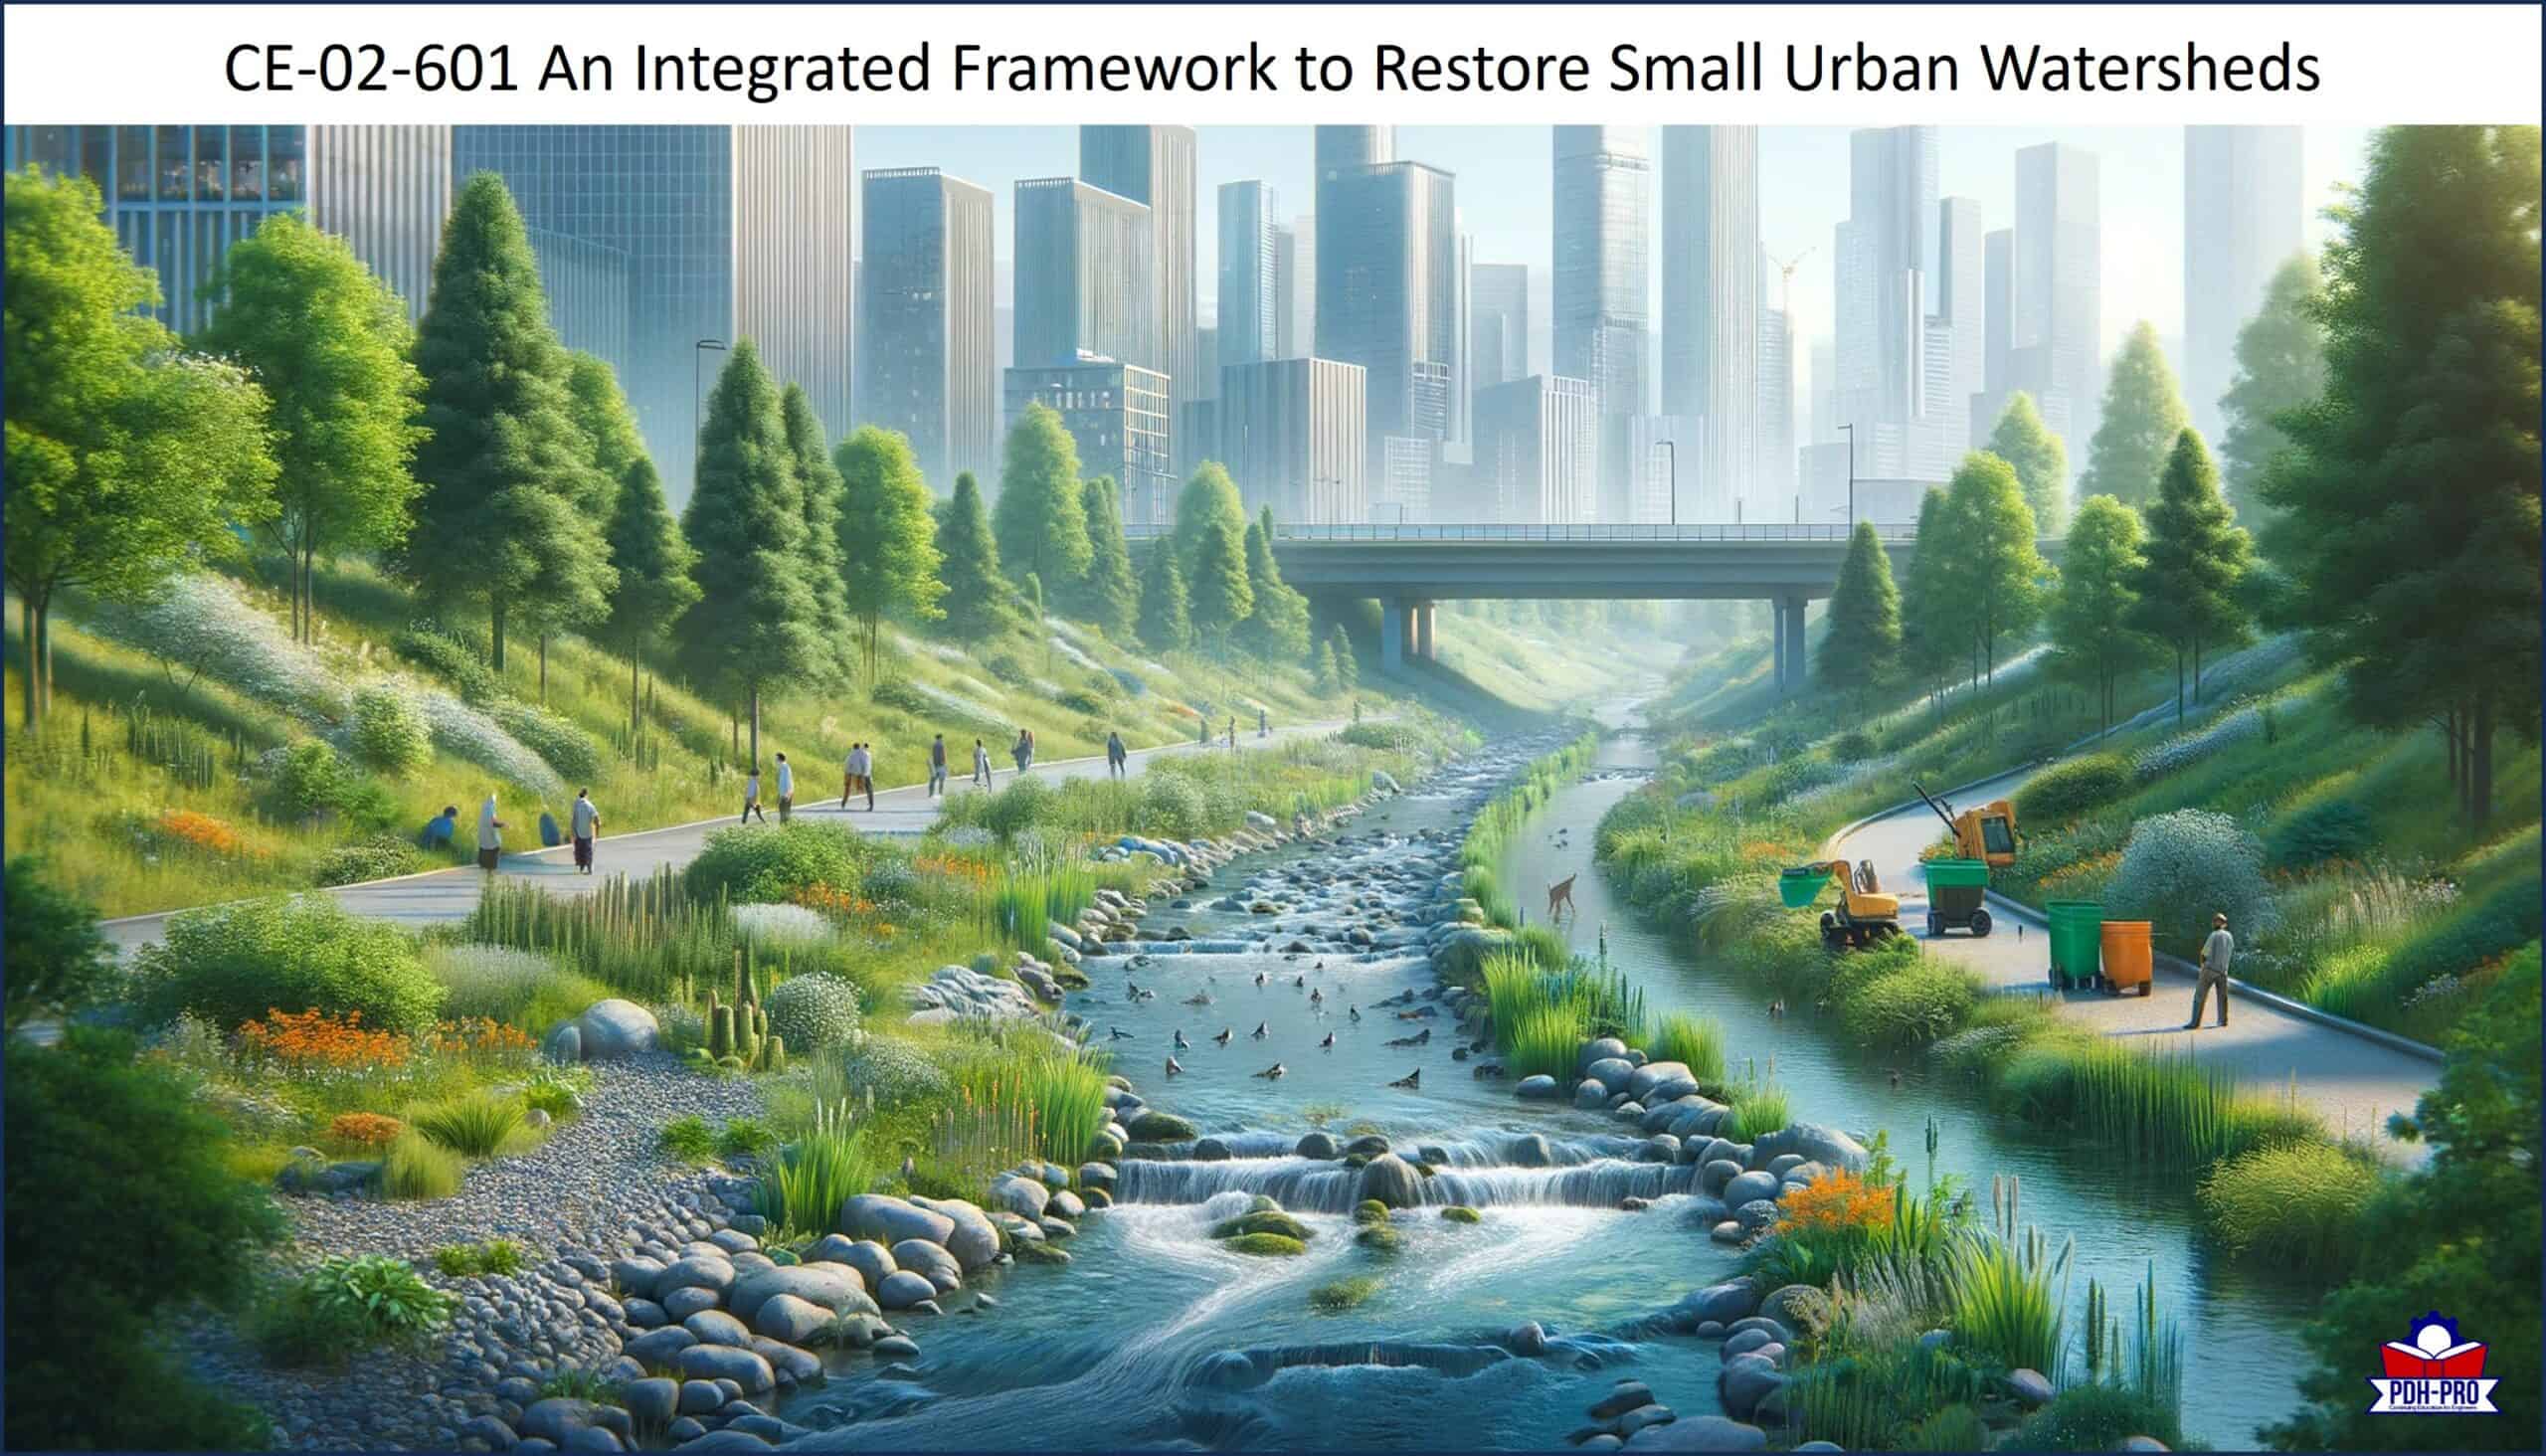 An Integrated Framework to Restore Small Urban Watersheds